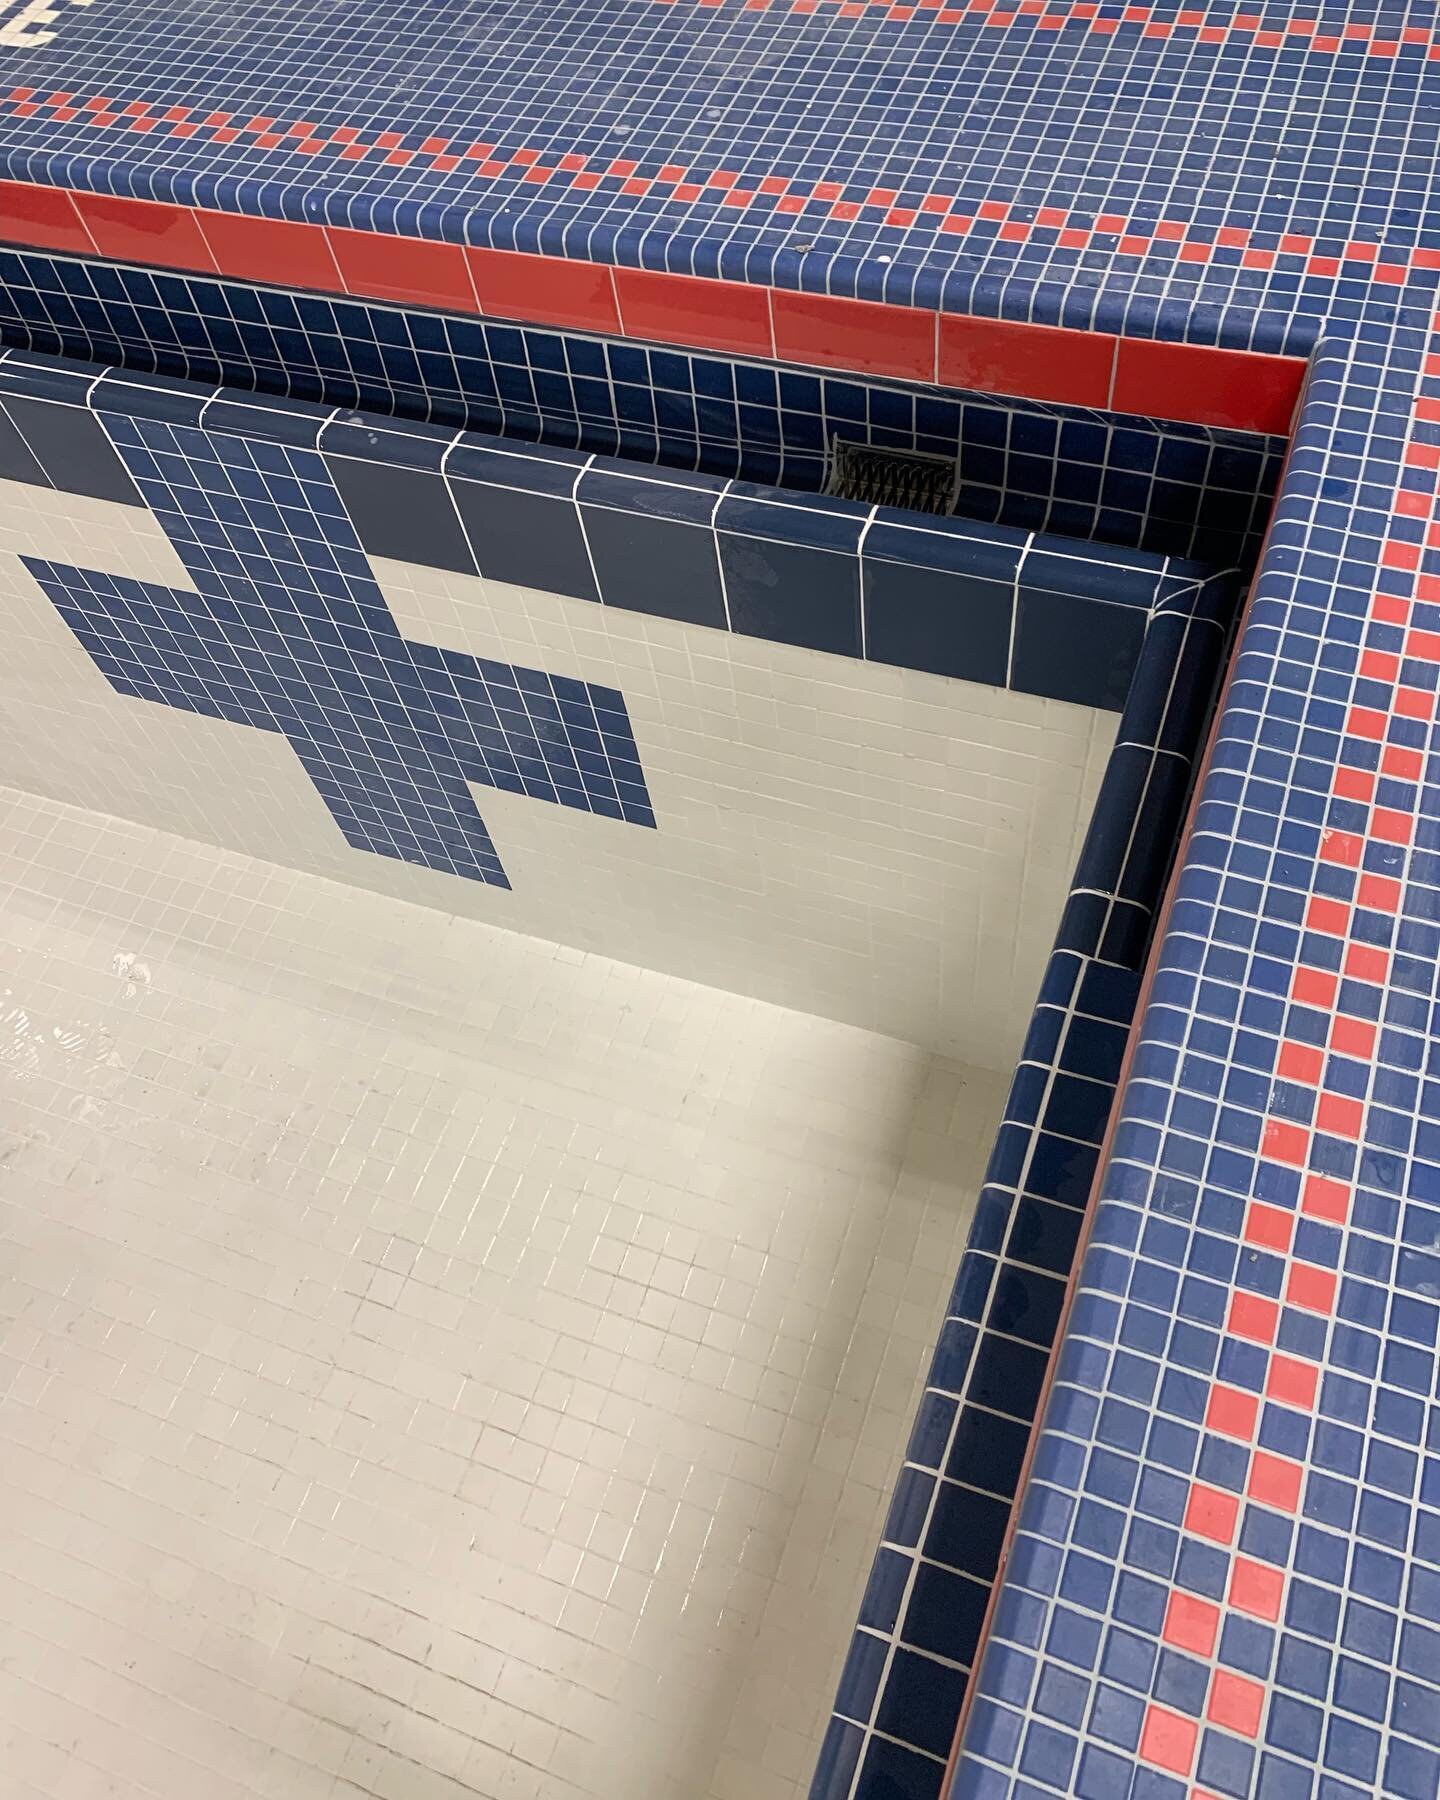 We're getting close over at Centennial High School! Great edge detail, team 👏

#AndersonPoolworks #PoolRenovation #tileinstallation